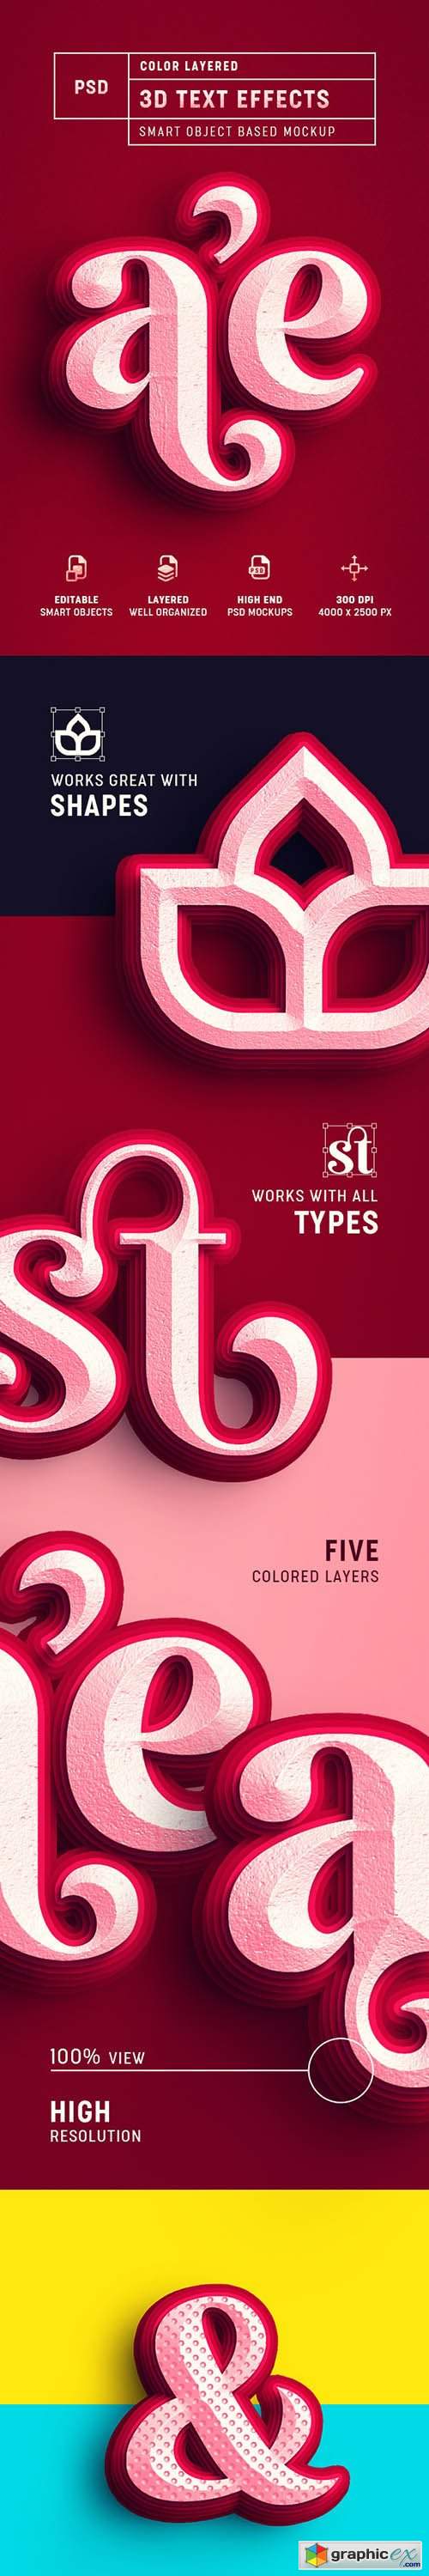 Color Layered 3D Text Effect Mockup 